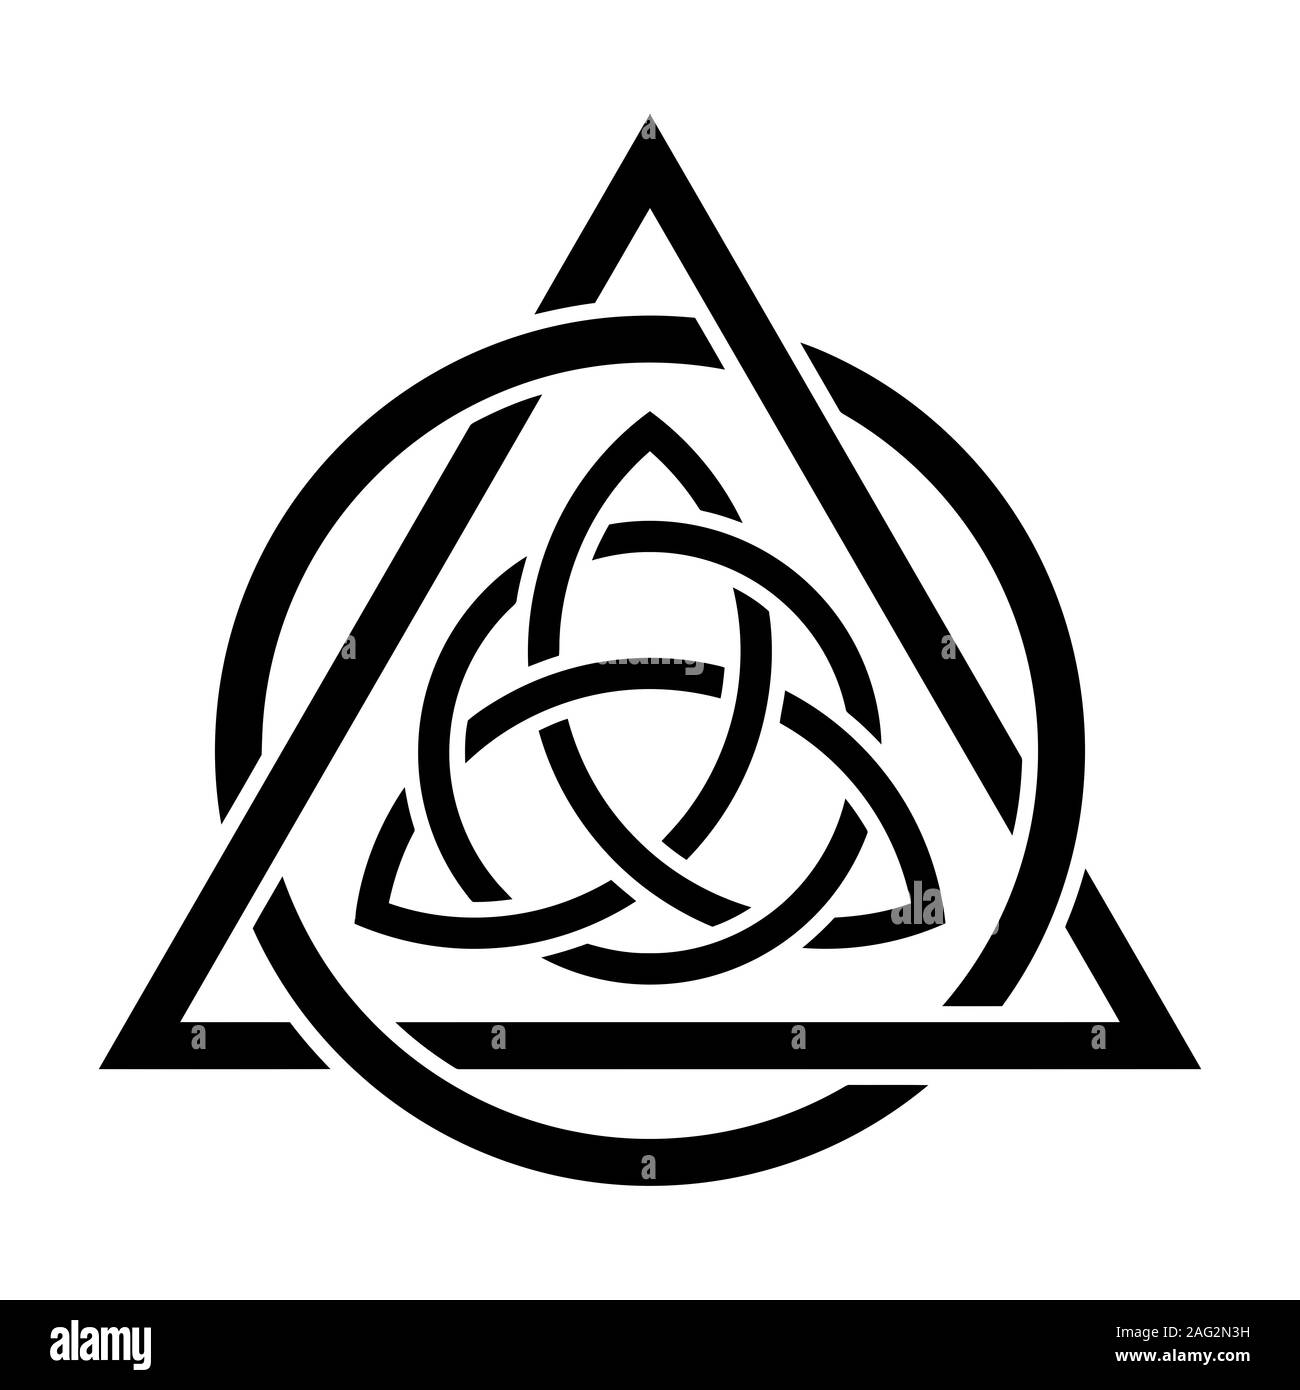 Triquetra inside a triangle interlaced with circle symbol Stock Photo